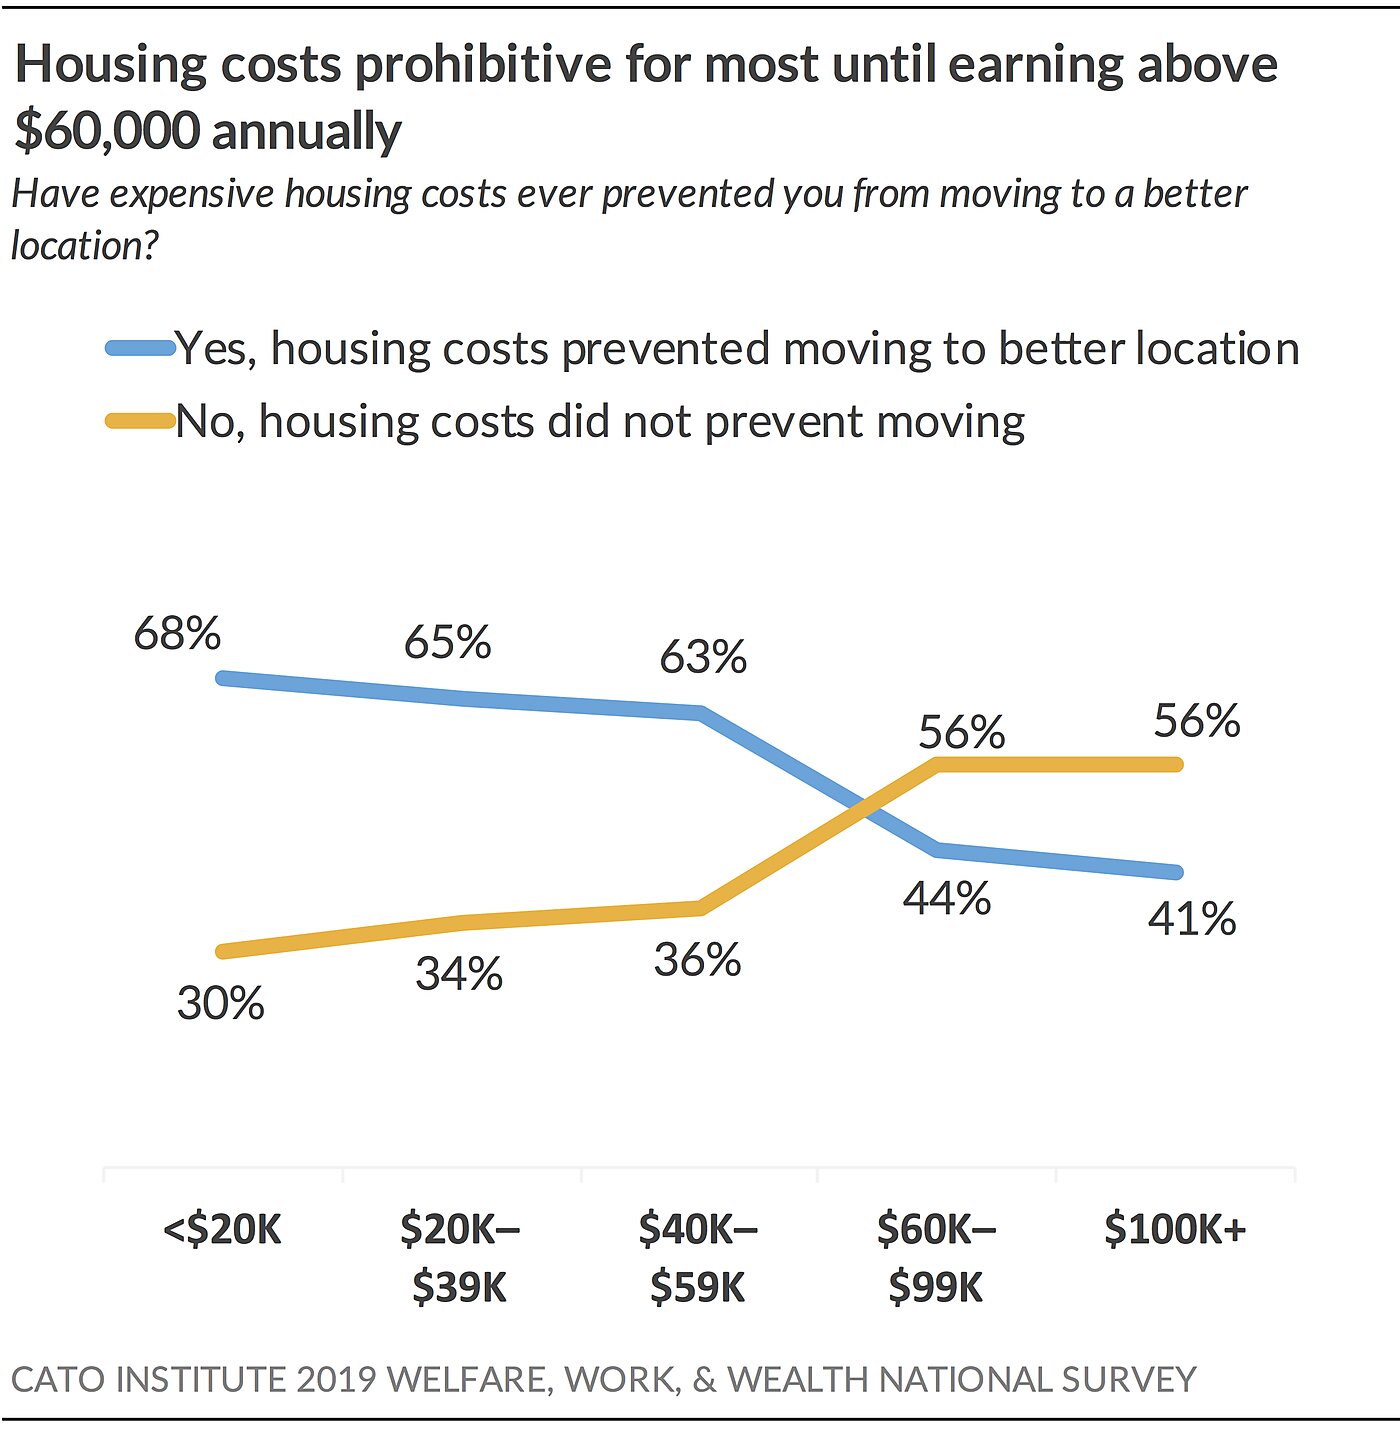 Housing costs prohibitive for most earning under $60k